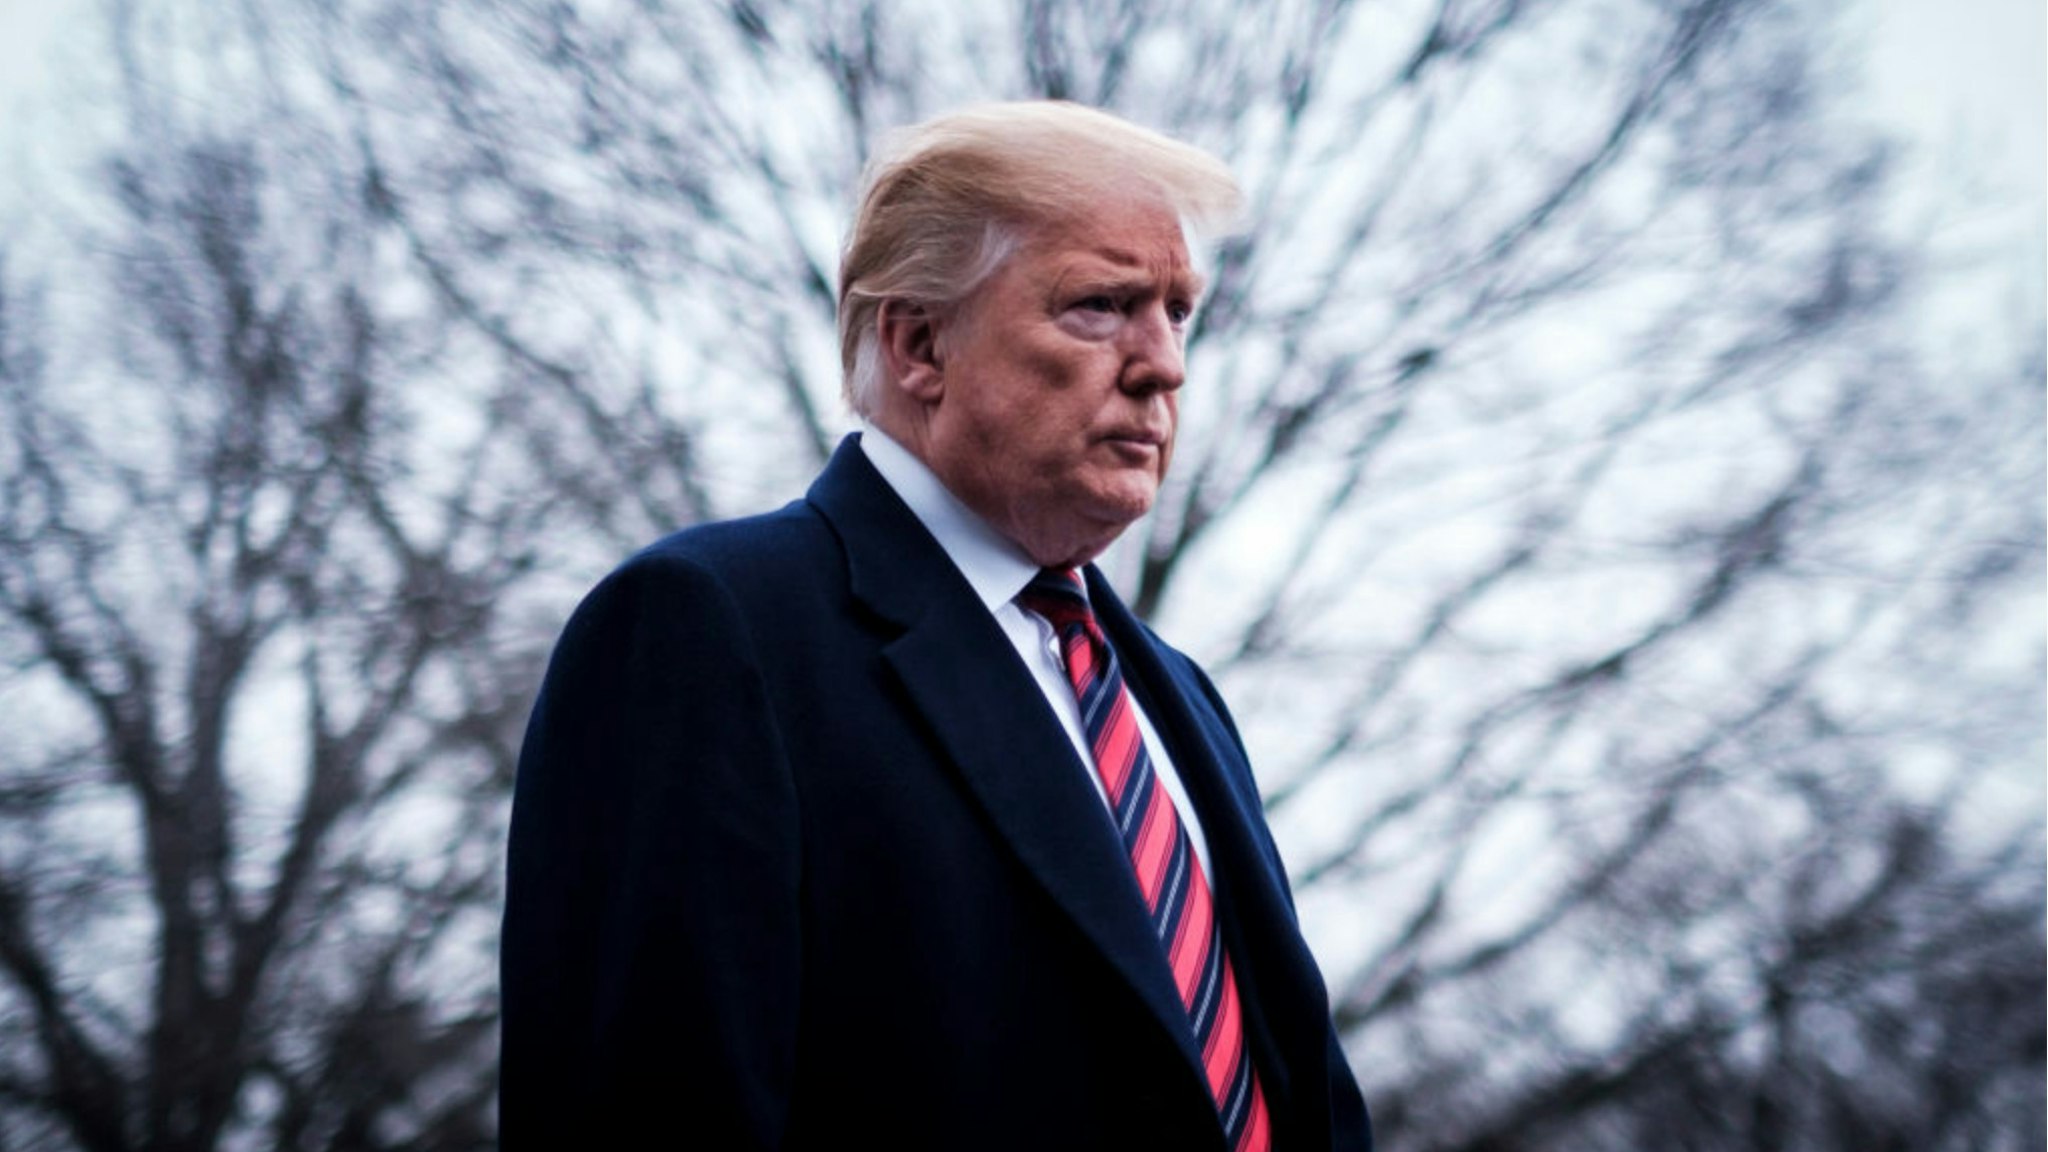 President Donald Trump stops to speak to reporters as he prepared to board Marine One on the South Lawn of the White House on January 19, 2019 in Washington, DC.